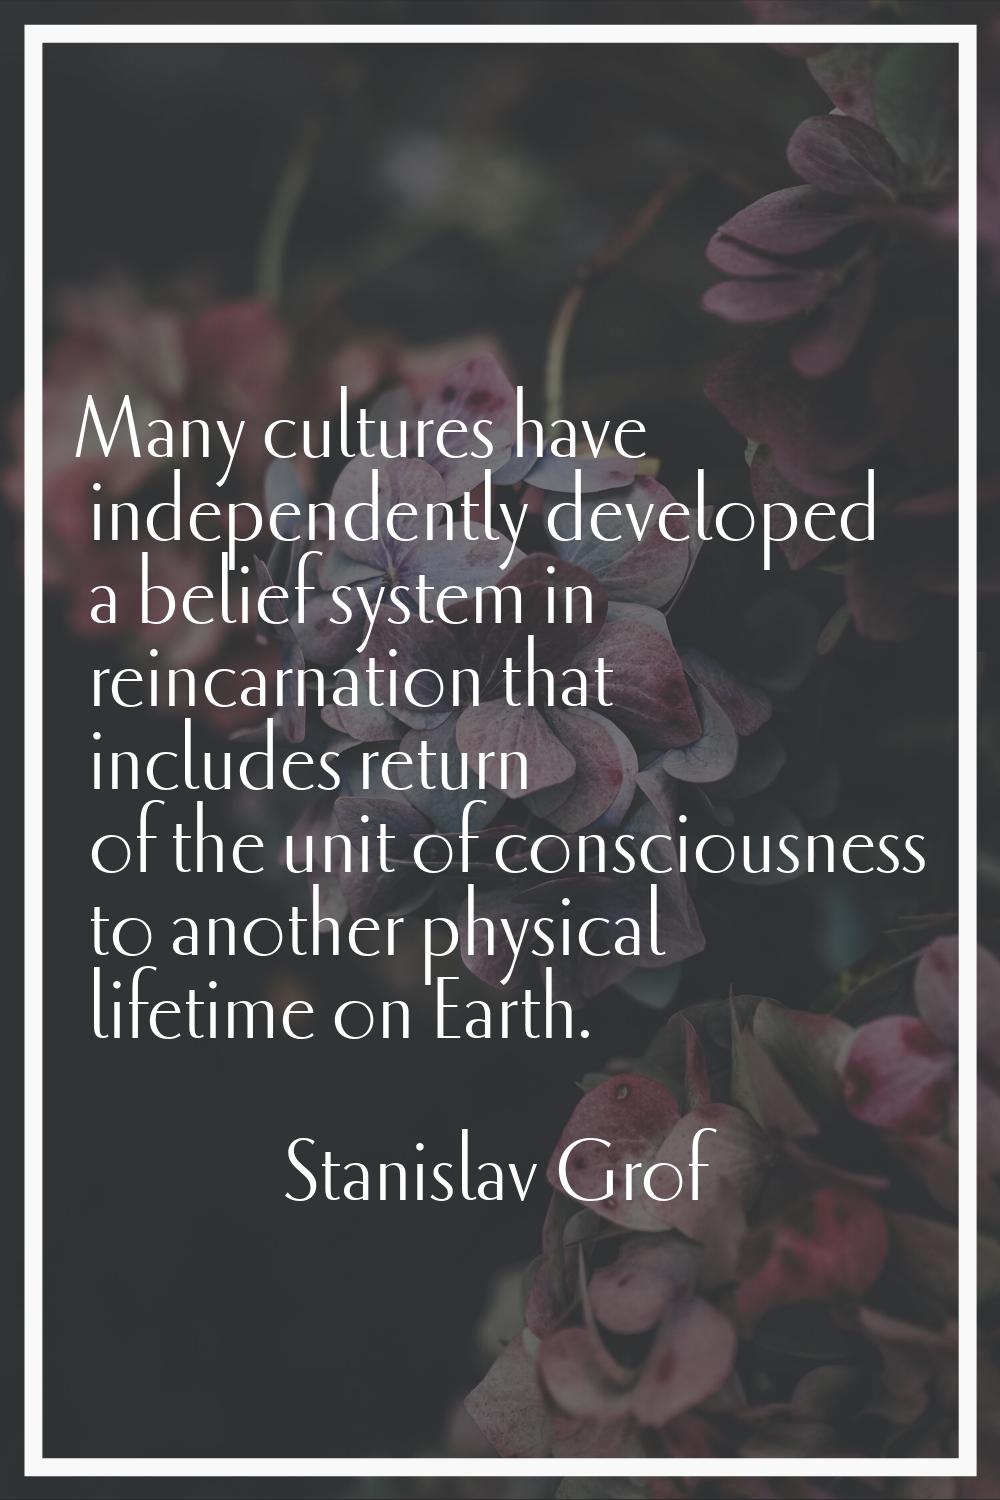 Many cultures have independently developed a belief system in reincarnation that includes return of